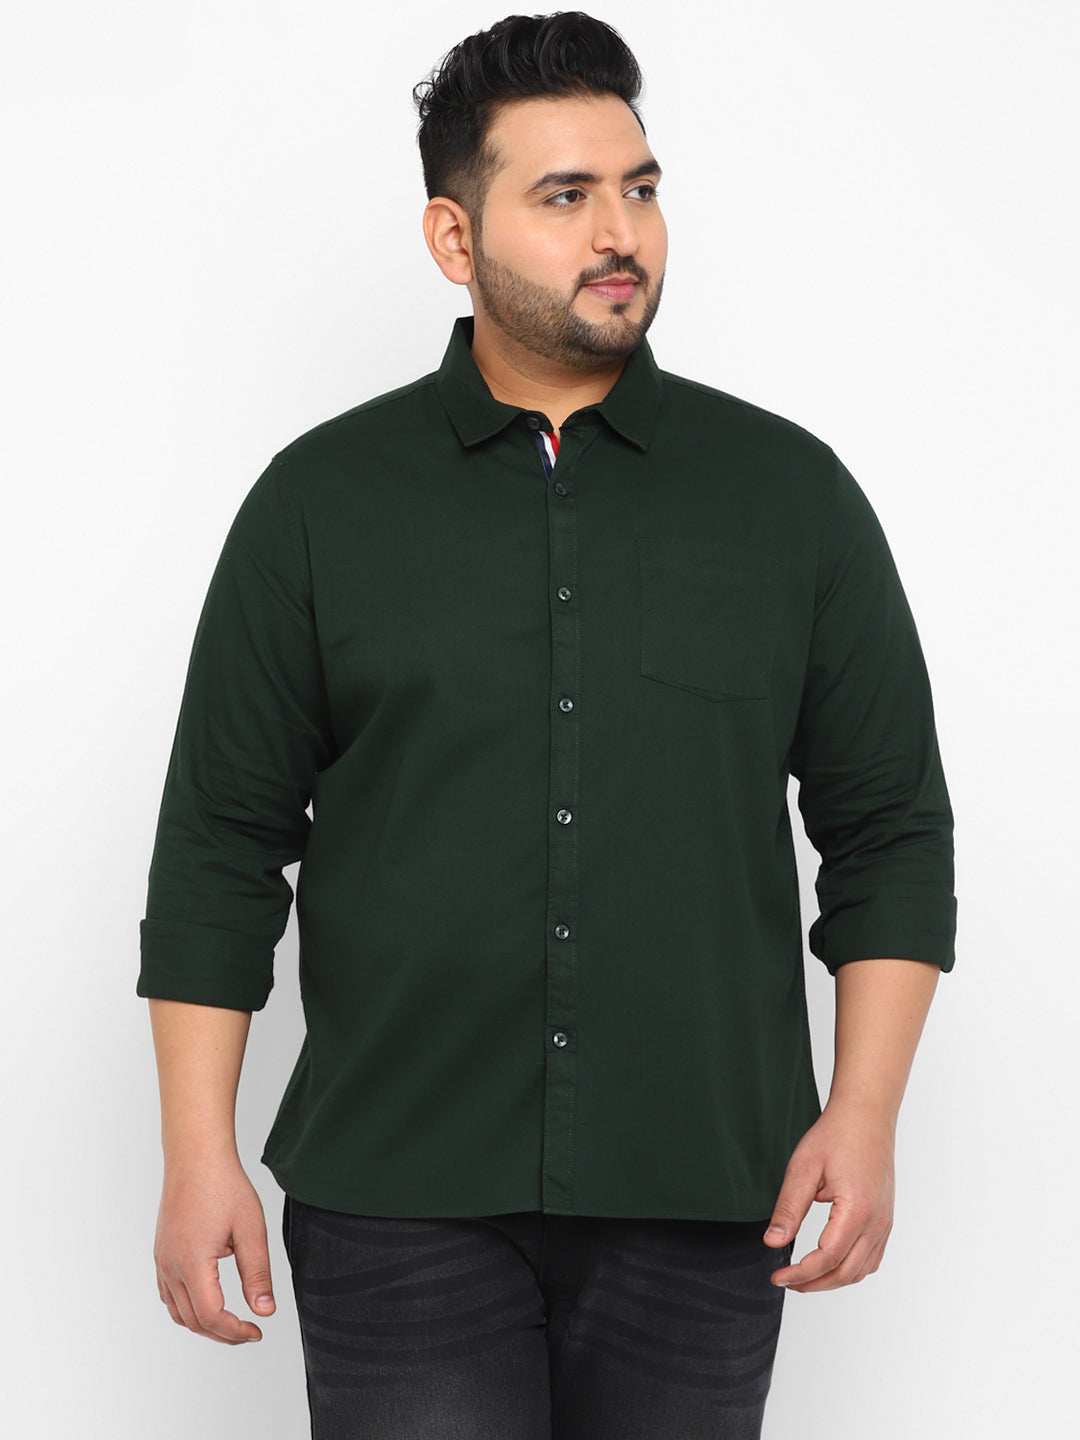 Plus Men's Olive Cotton Full Sleeve Regular Fit Casual Solid Shirt